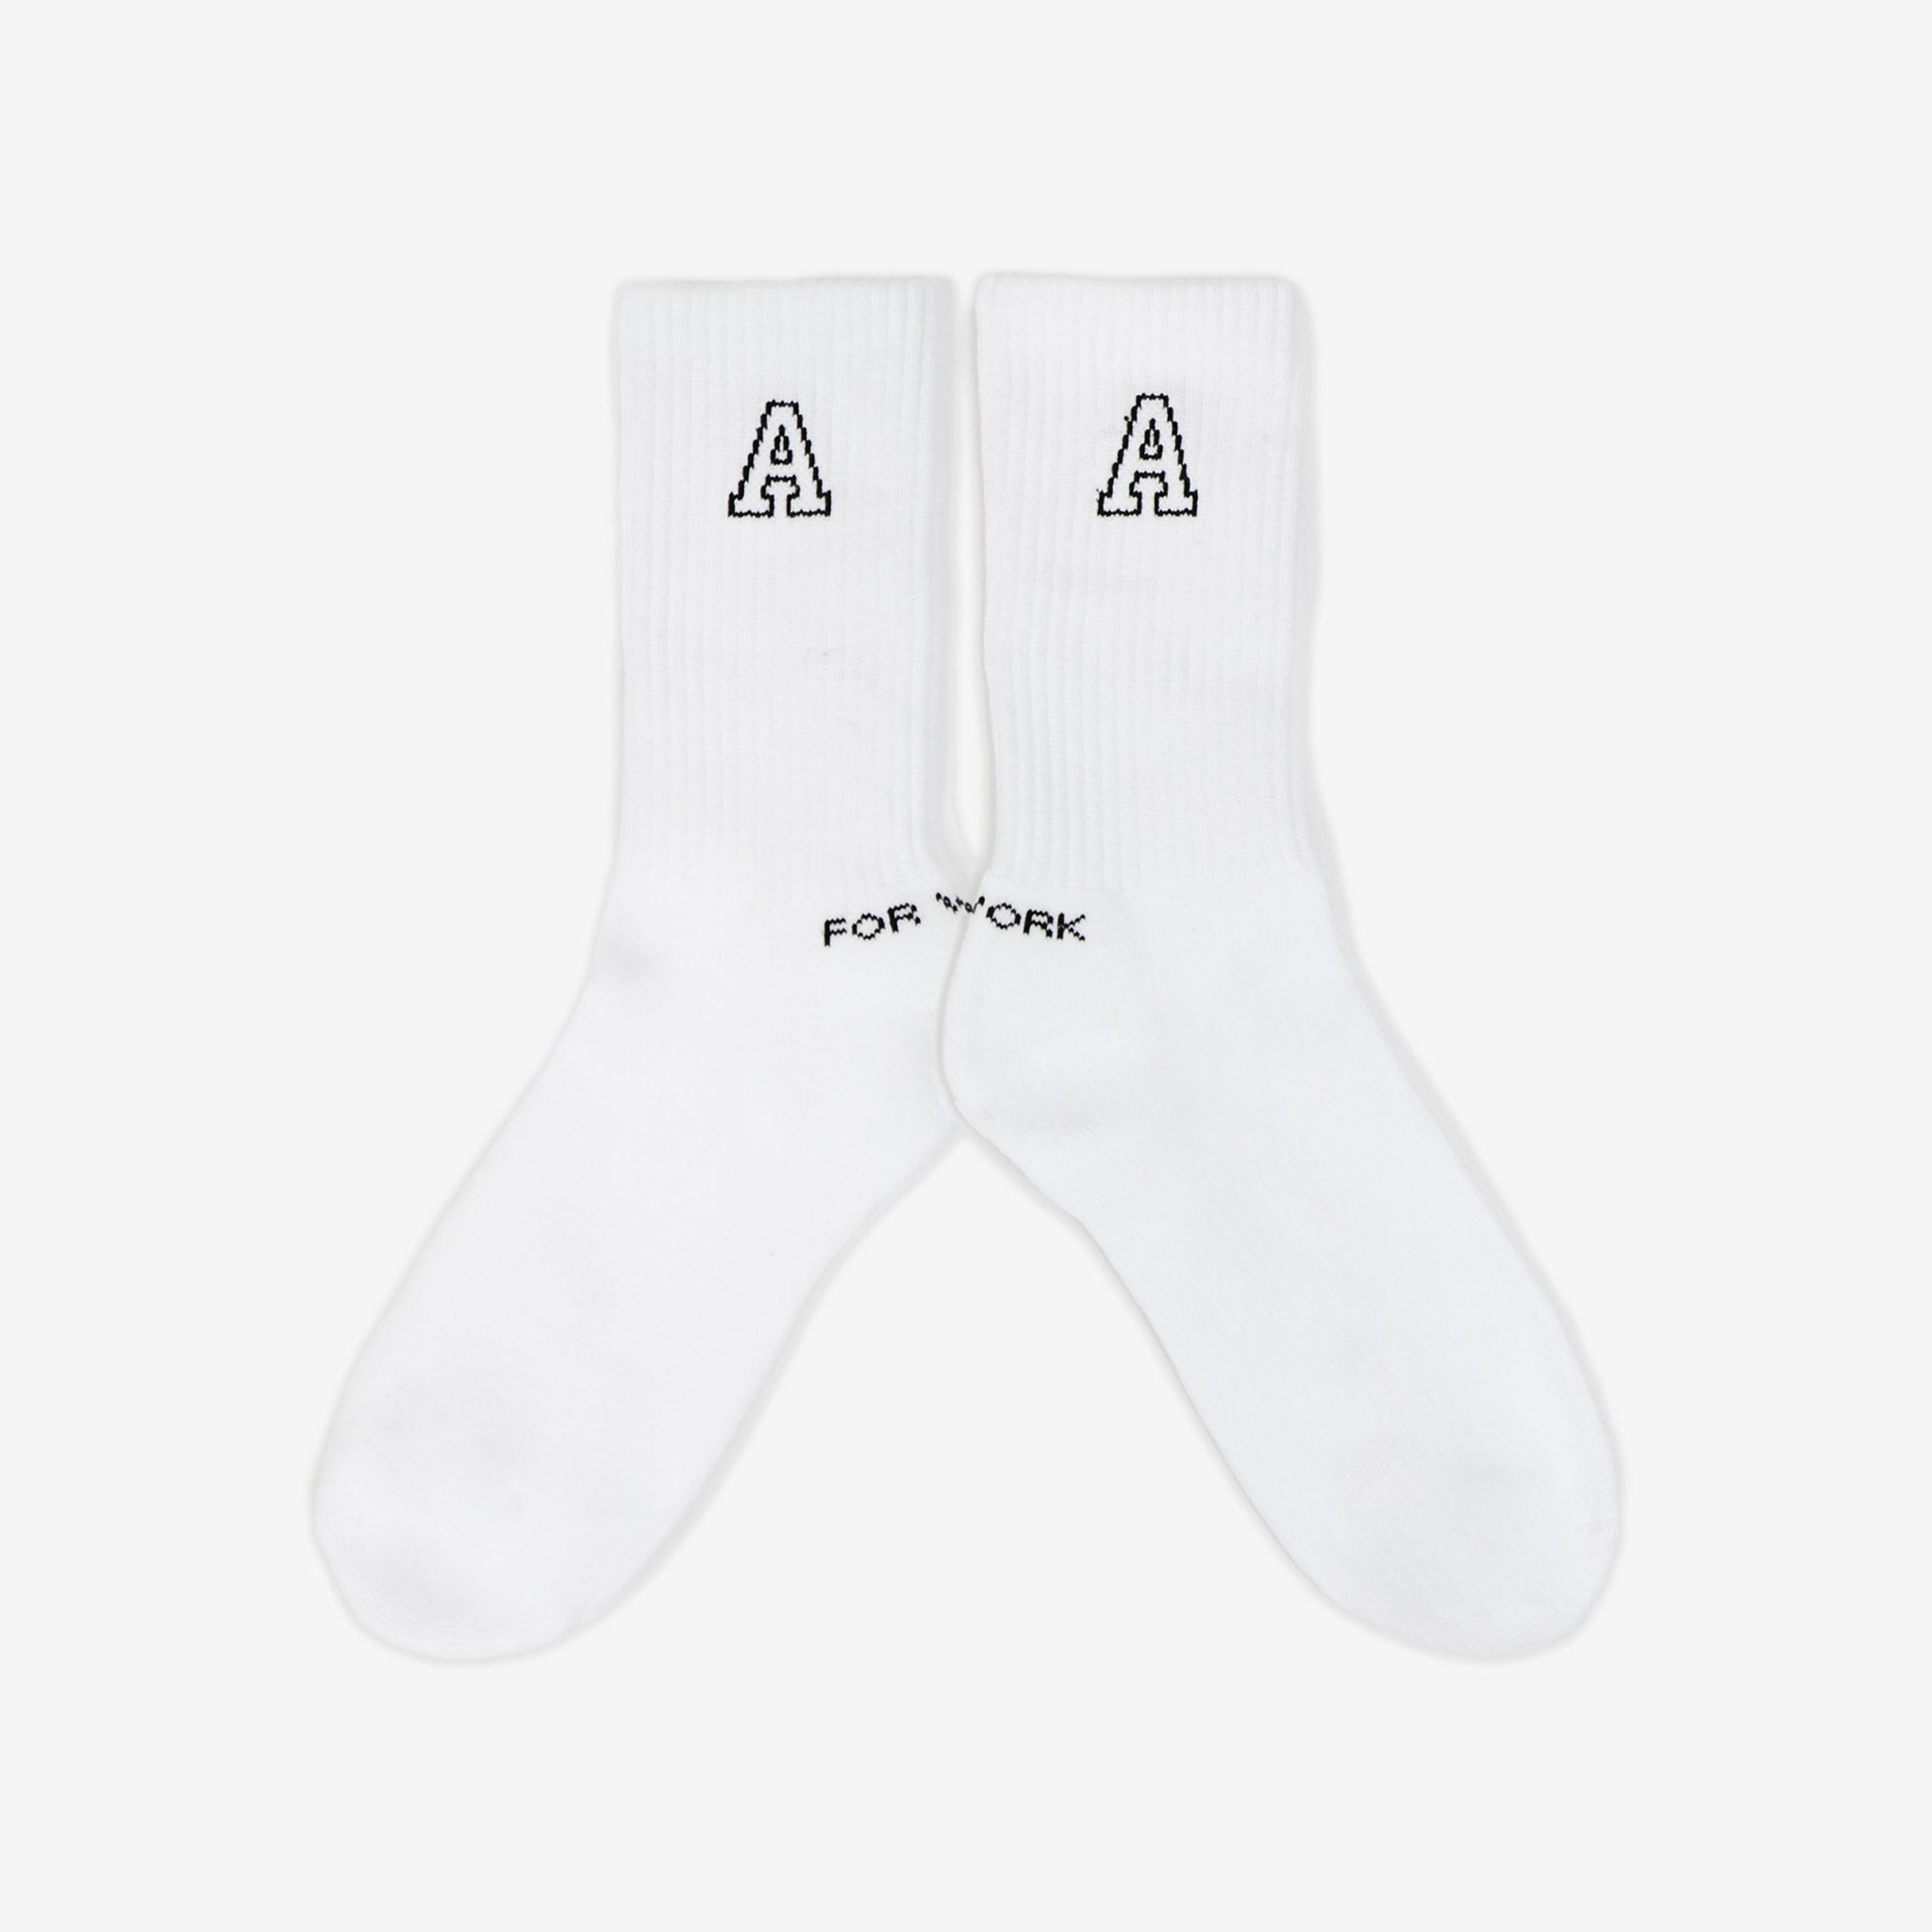 "A" Sock for Work